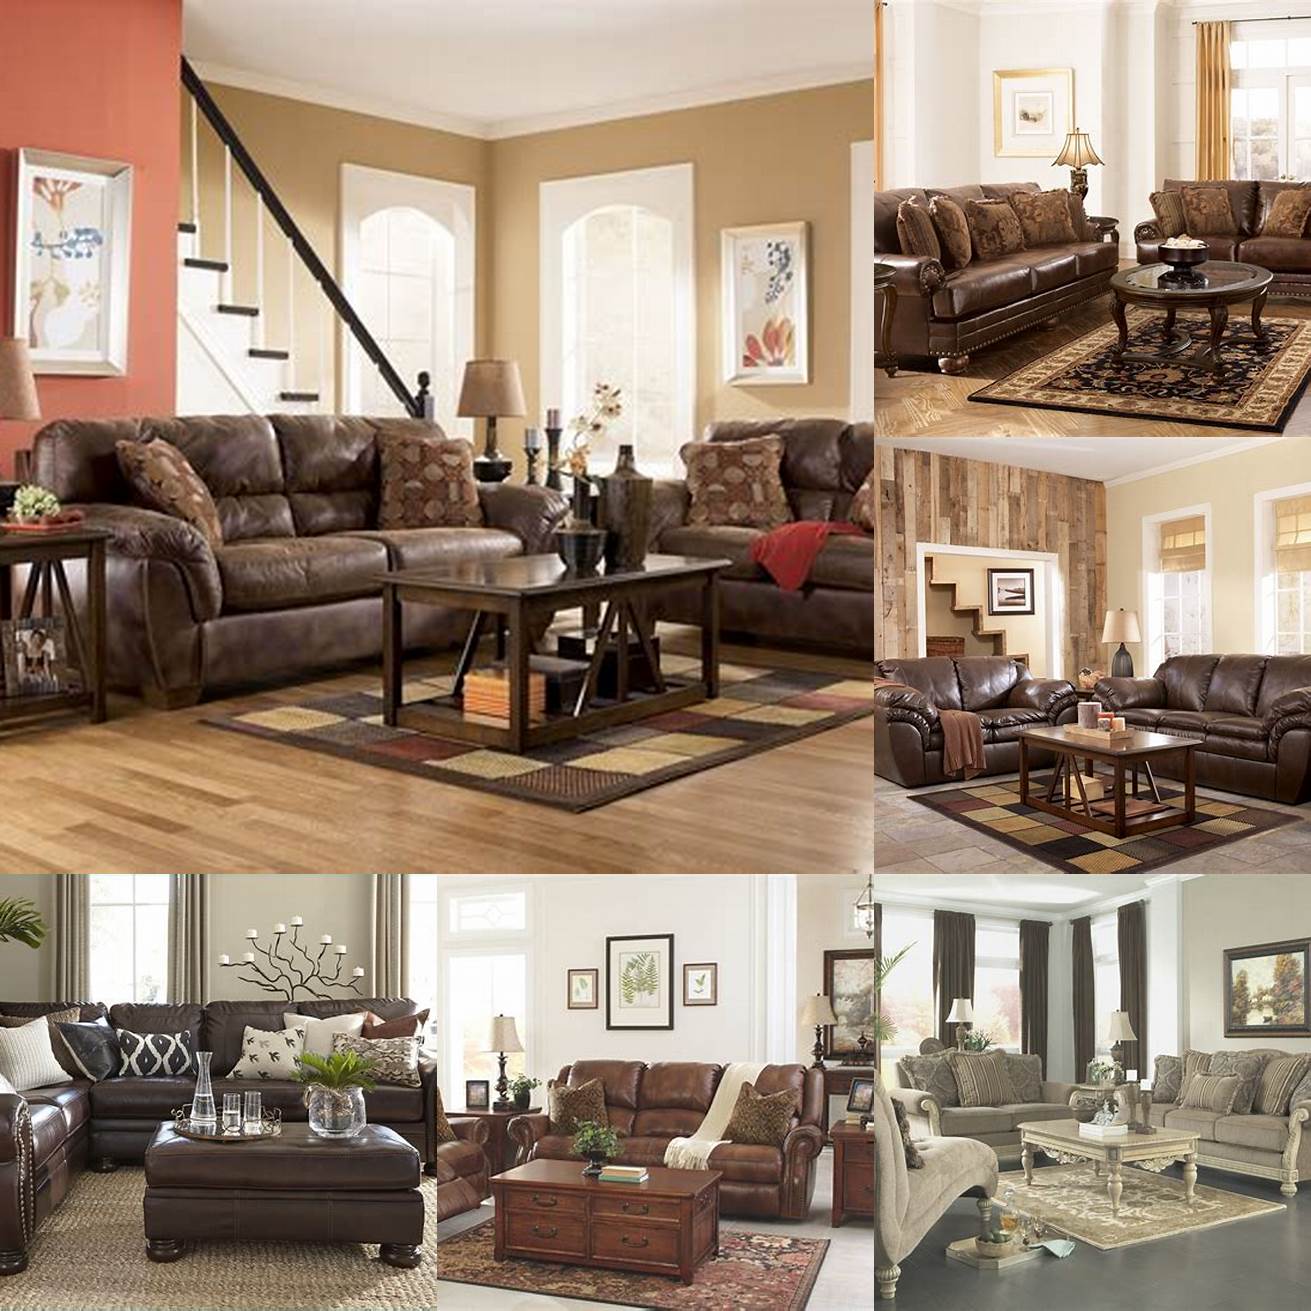 Image of the Ashley Furniture Leather Sofa in a family room setting